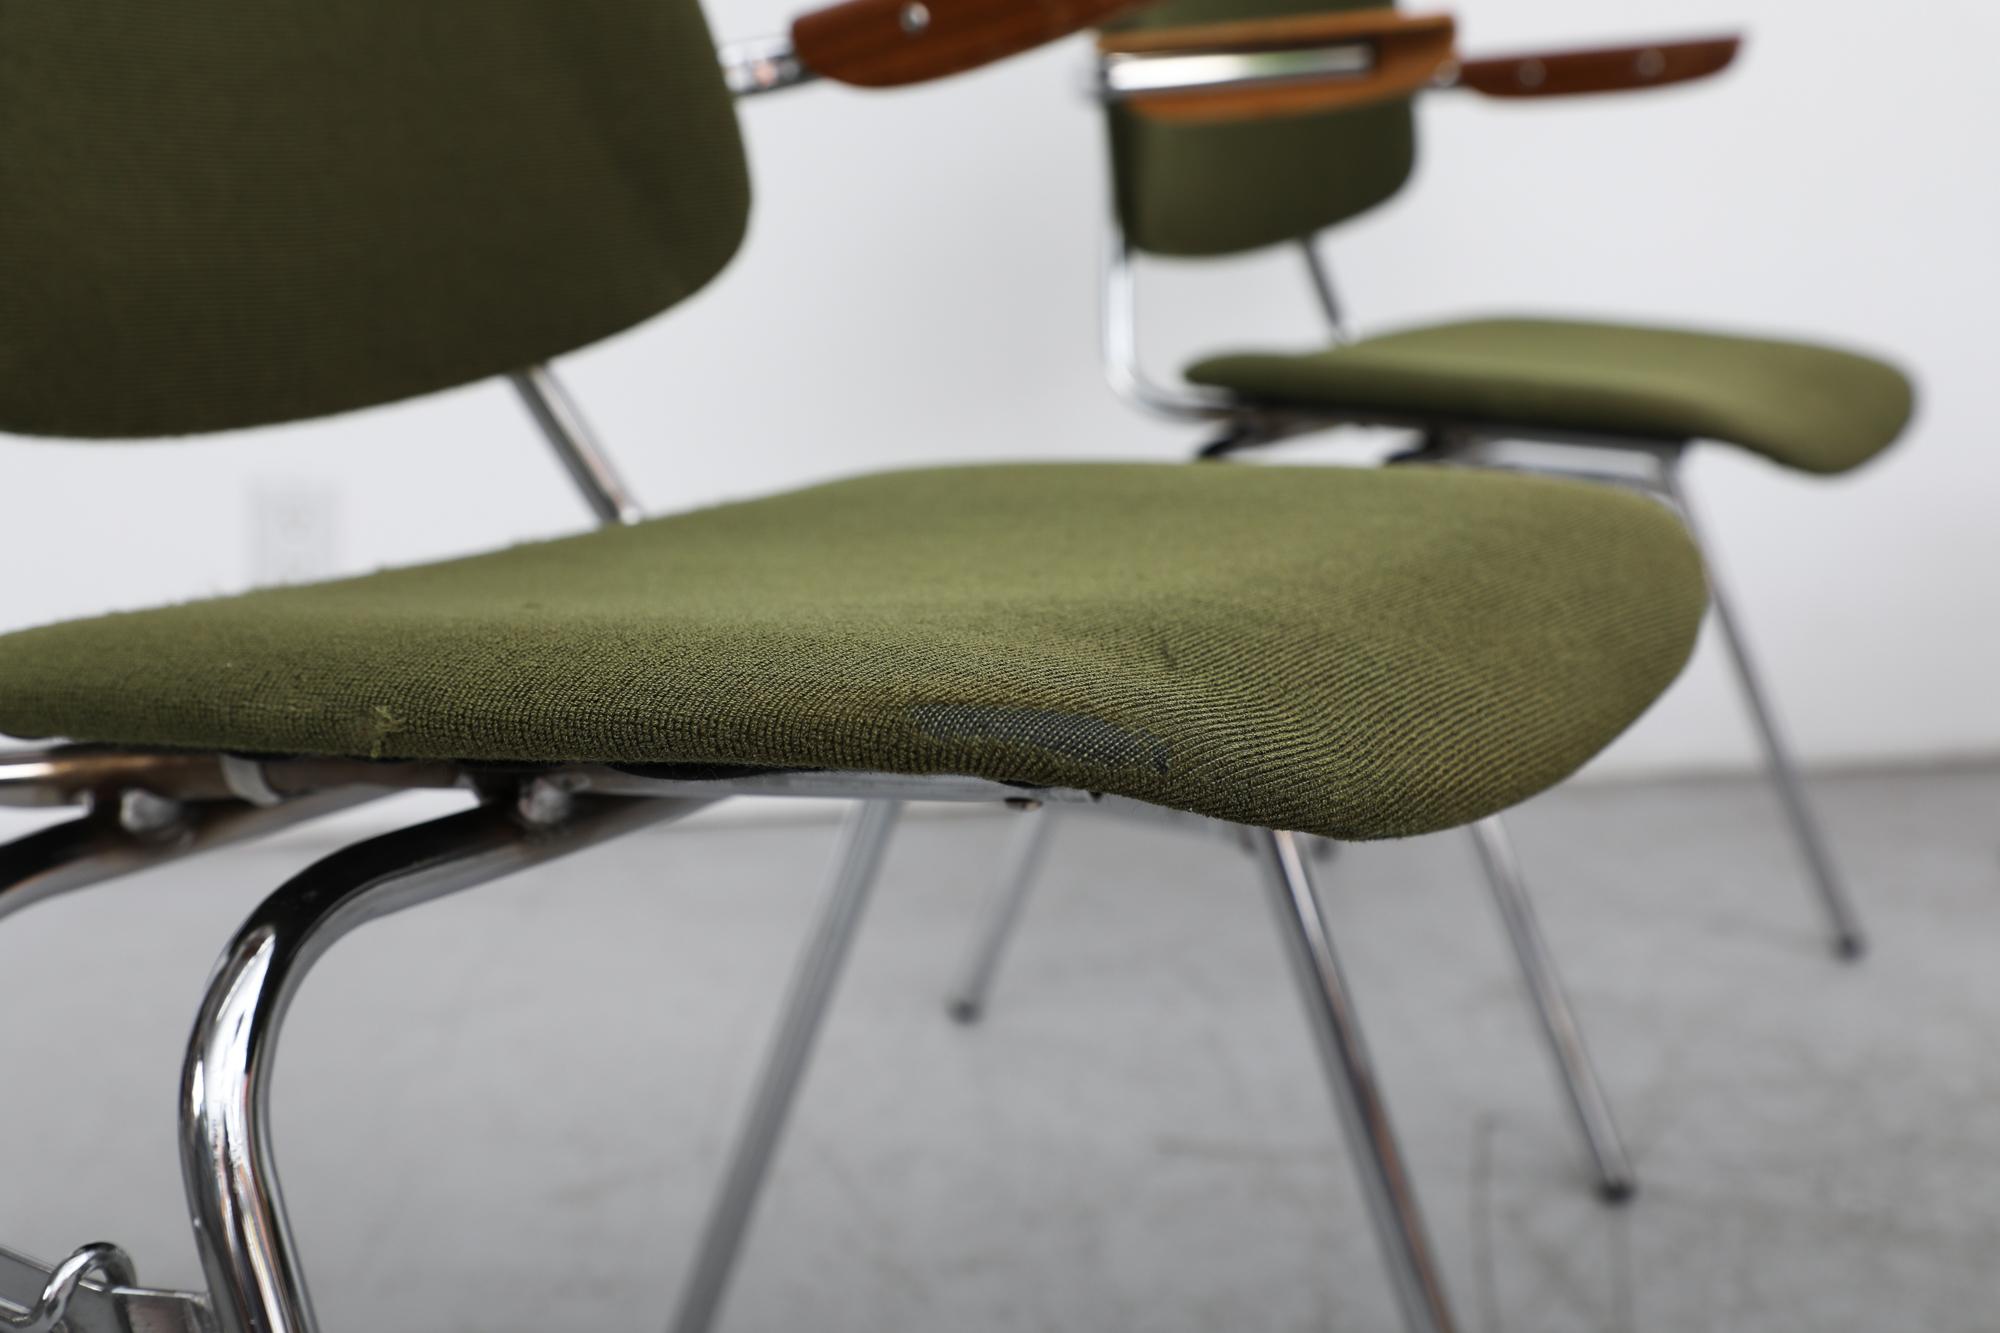 Kho Liang Ie 'Model 395 B/Z' Green Stacking Chairs with Armrests (Chaises empilables vertes avec accoudoirs) en vente 8